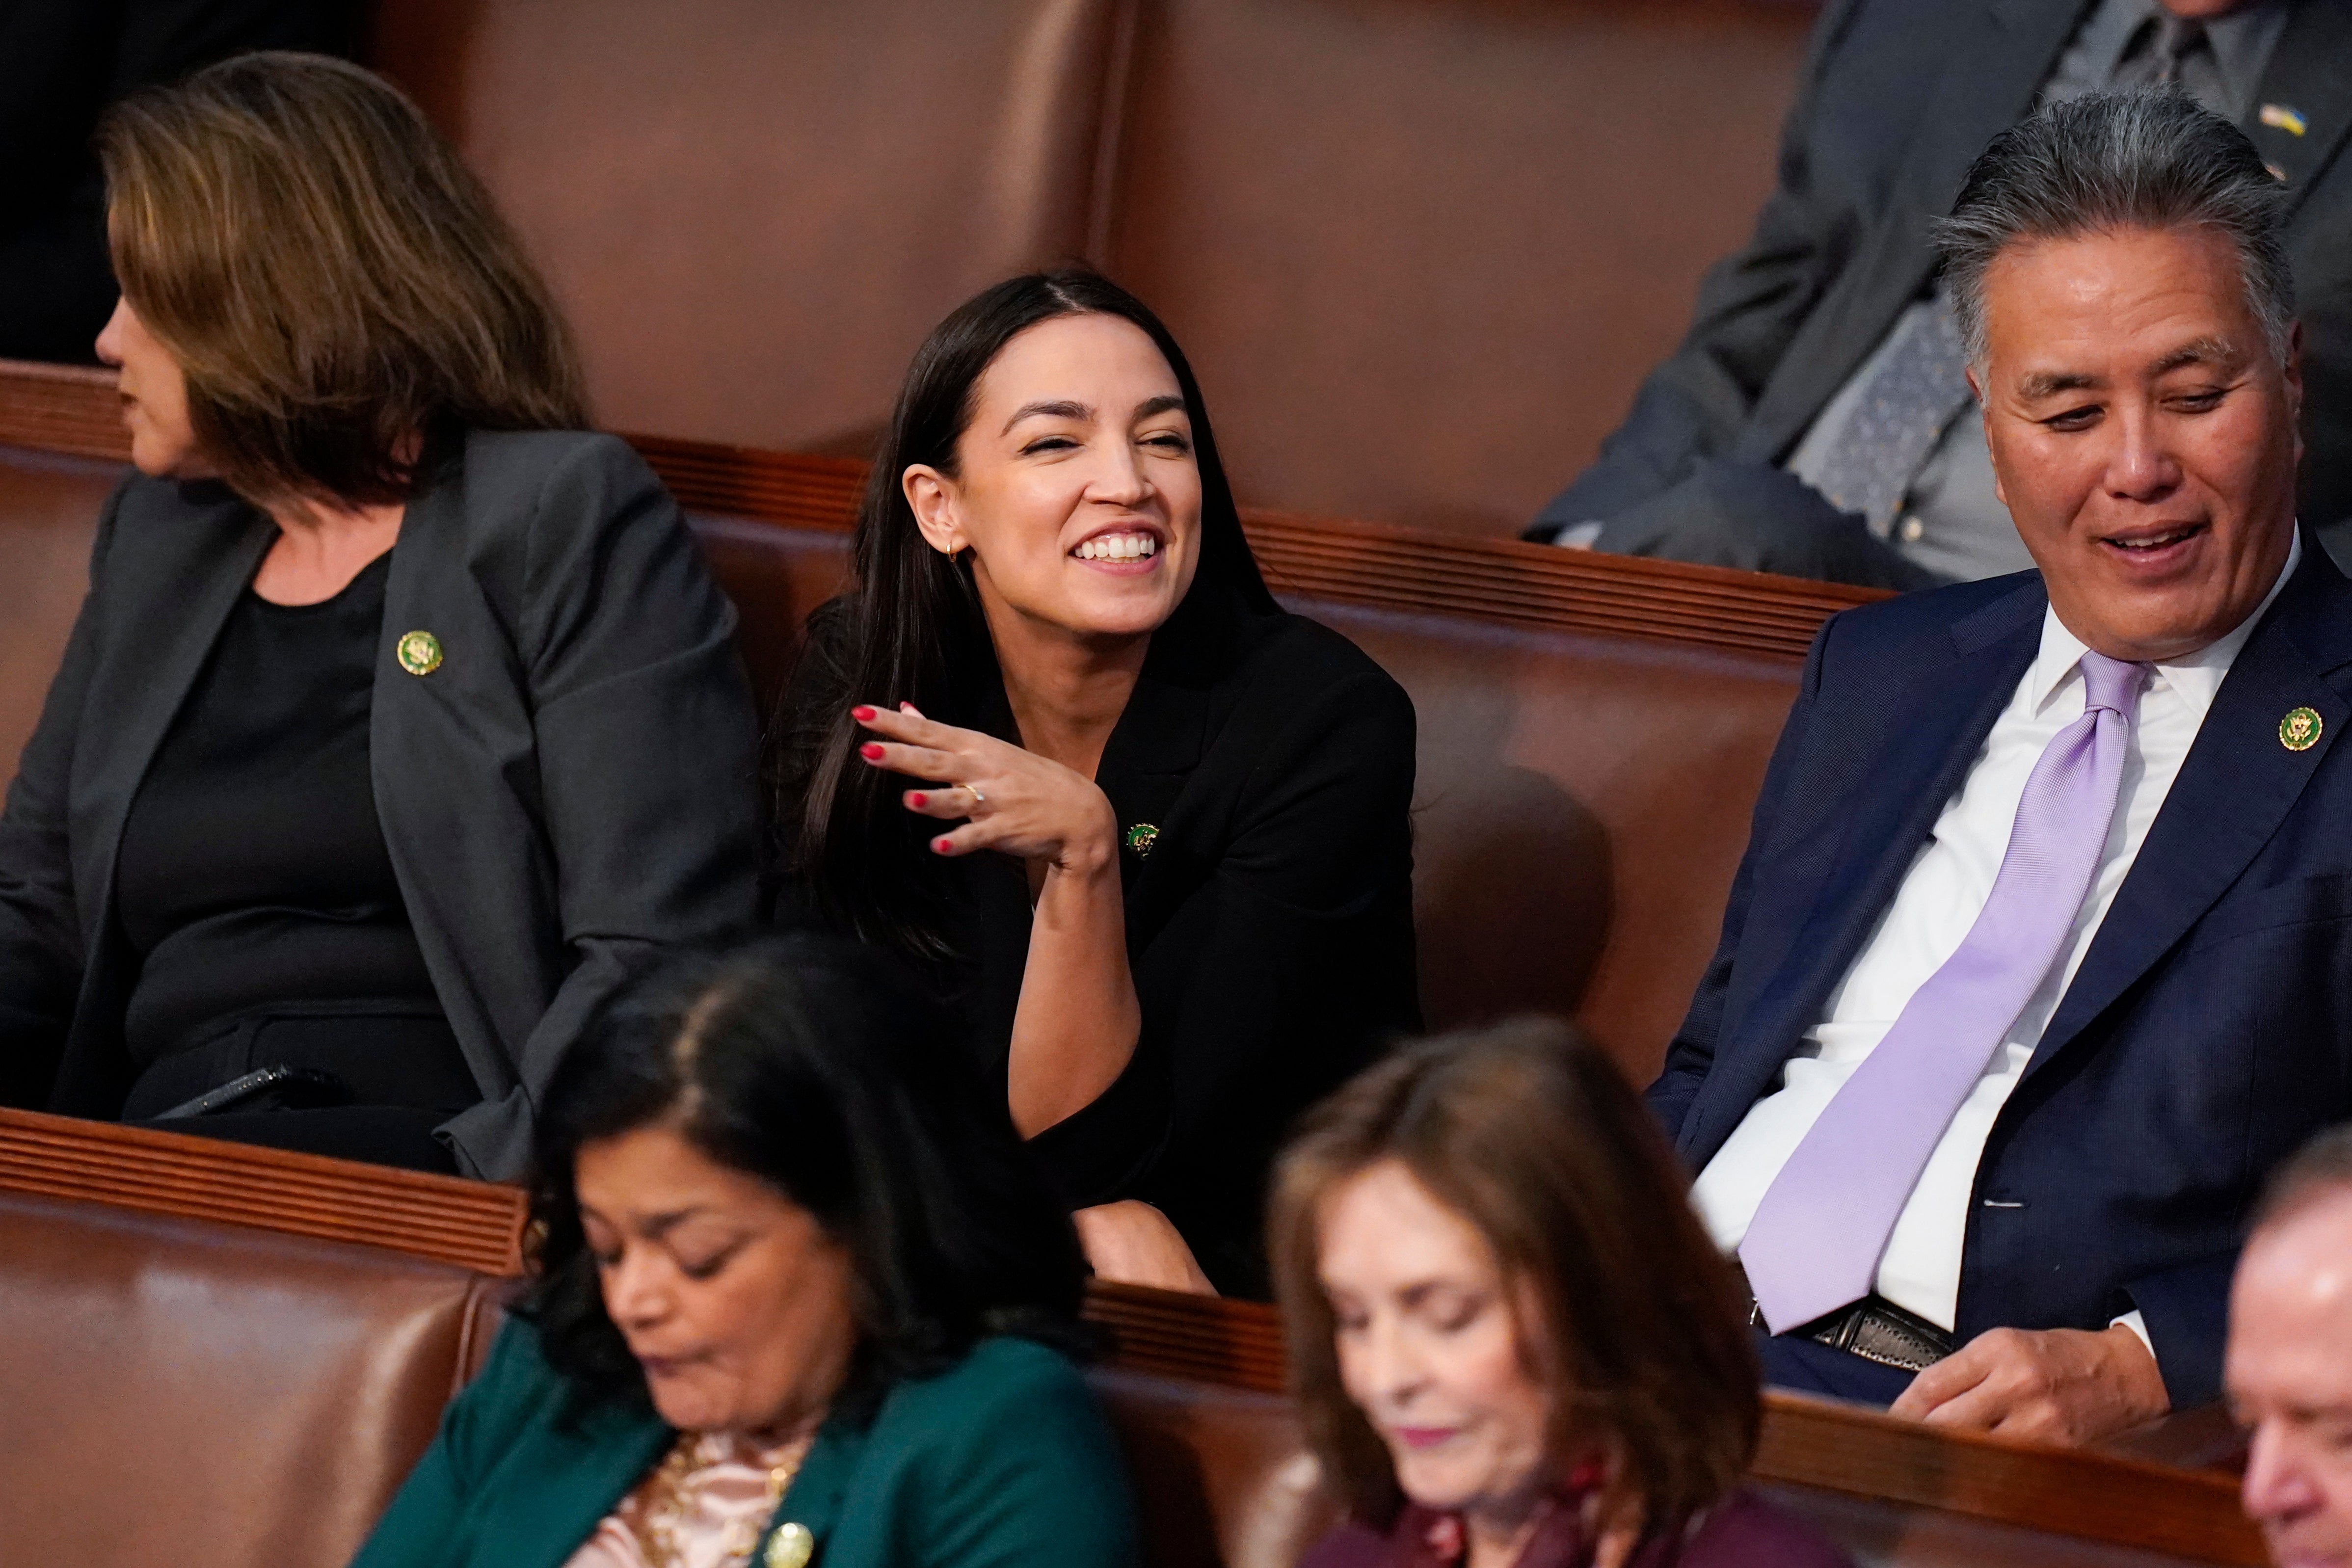 Alexandria Ocasio-Cortez has at times been pictured laughing on the House floor during the Republican impasse – but she says there are serious downsides to the failure to elect a Speaker